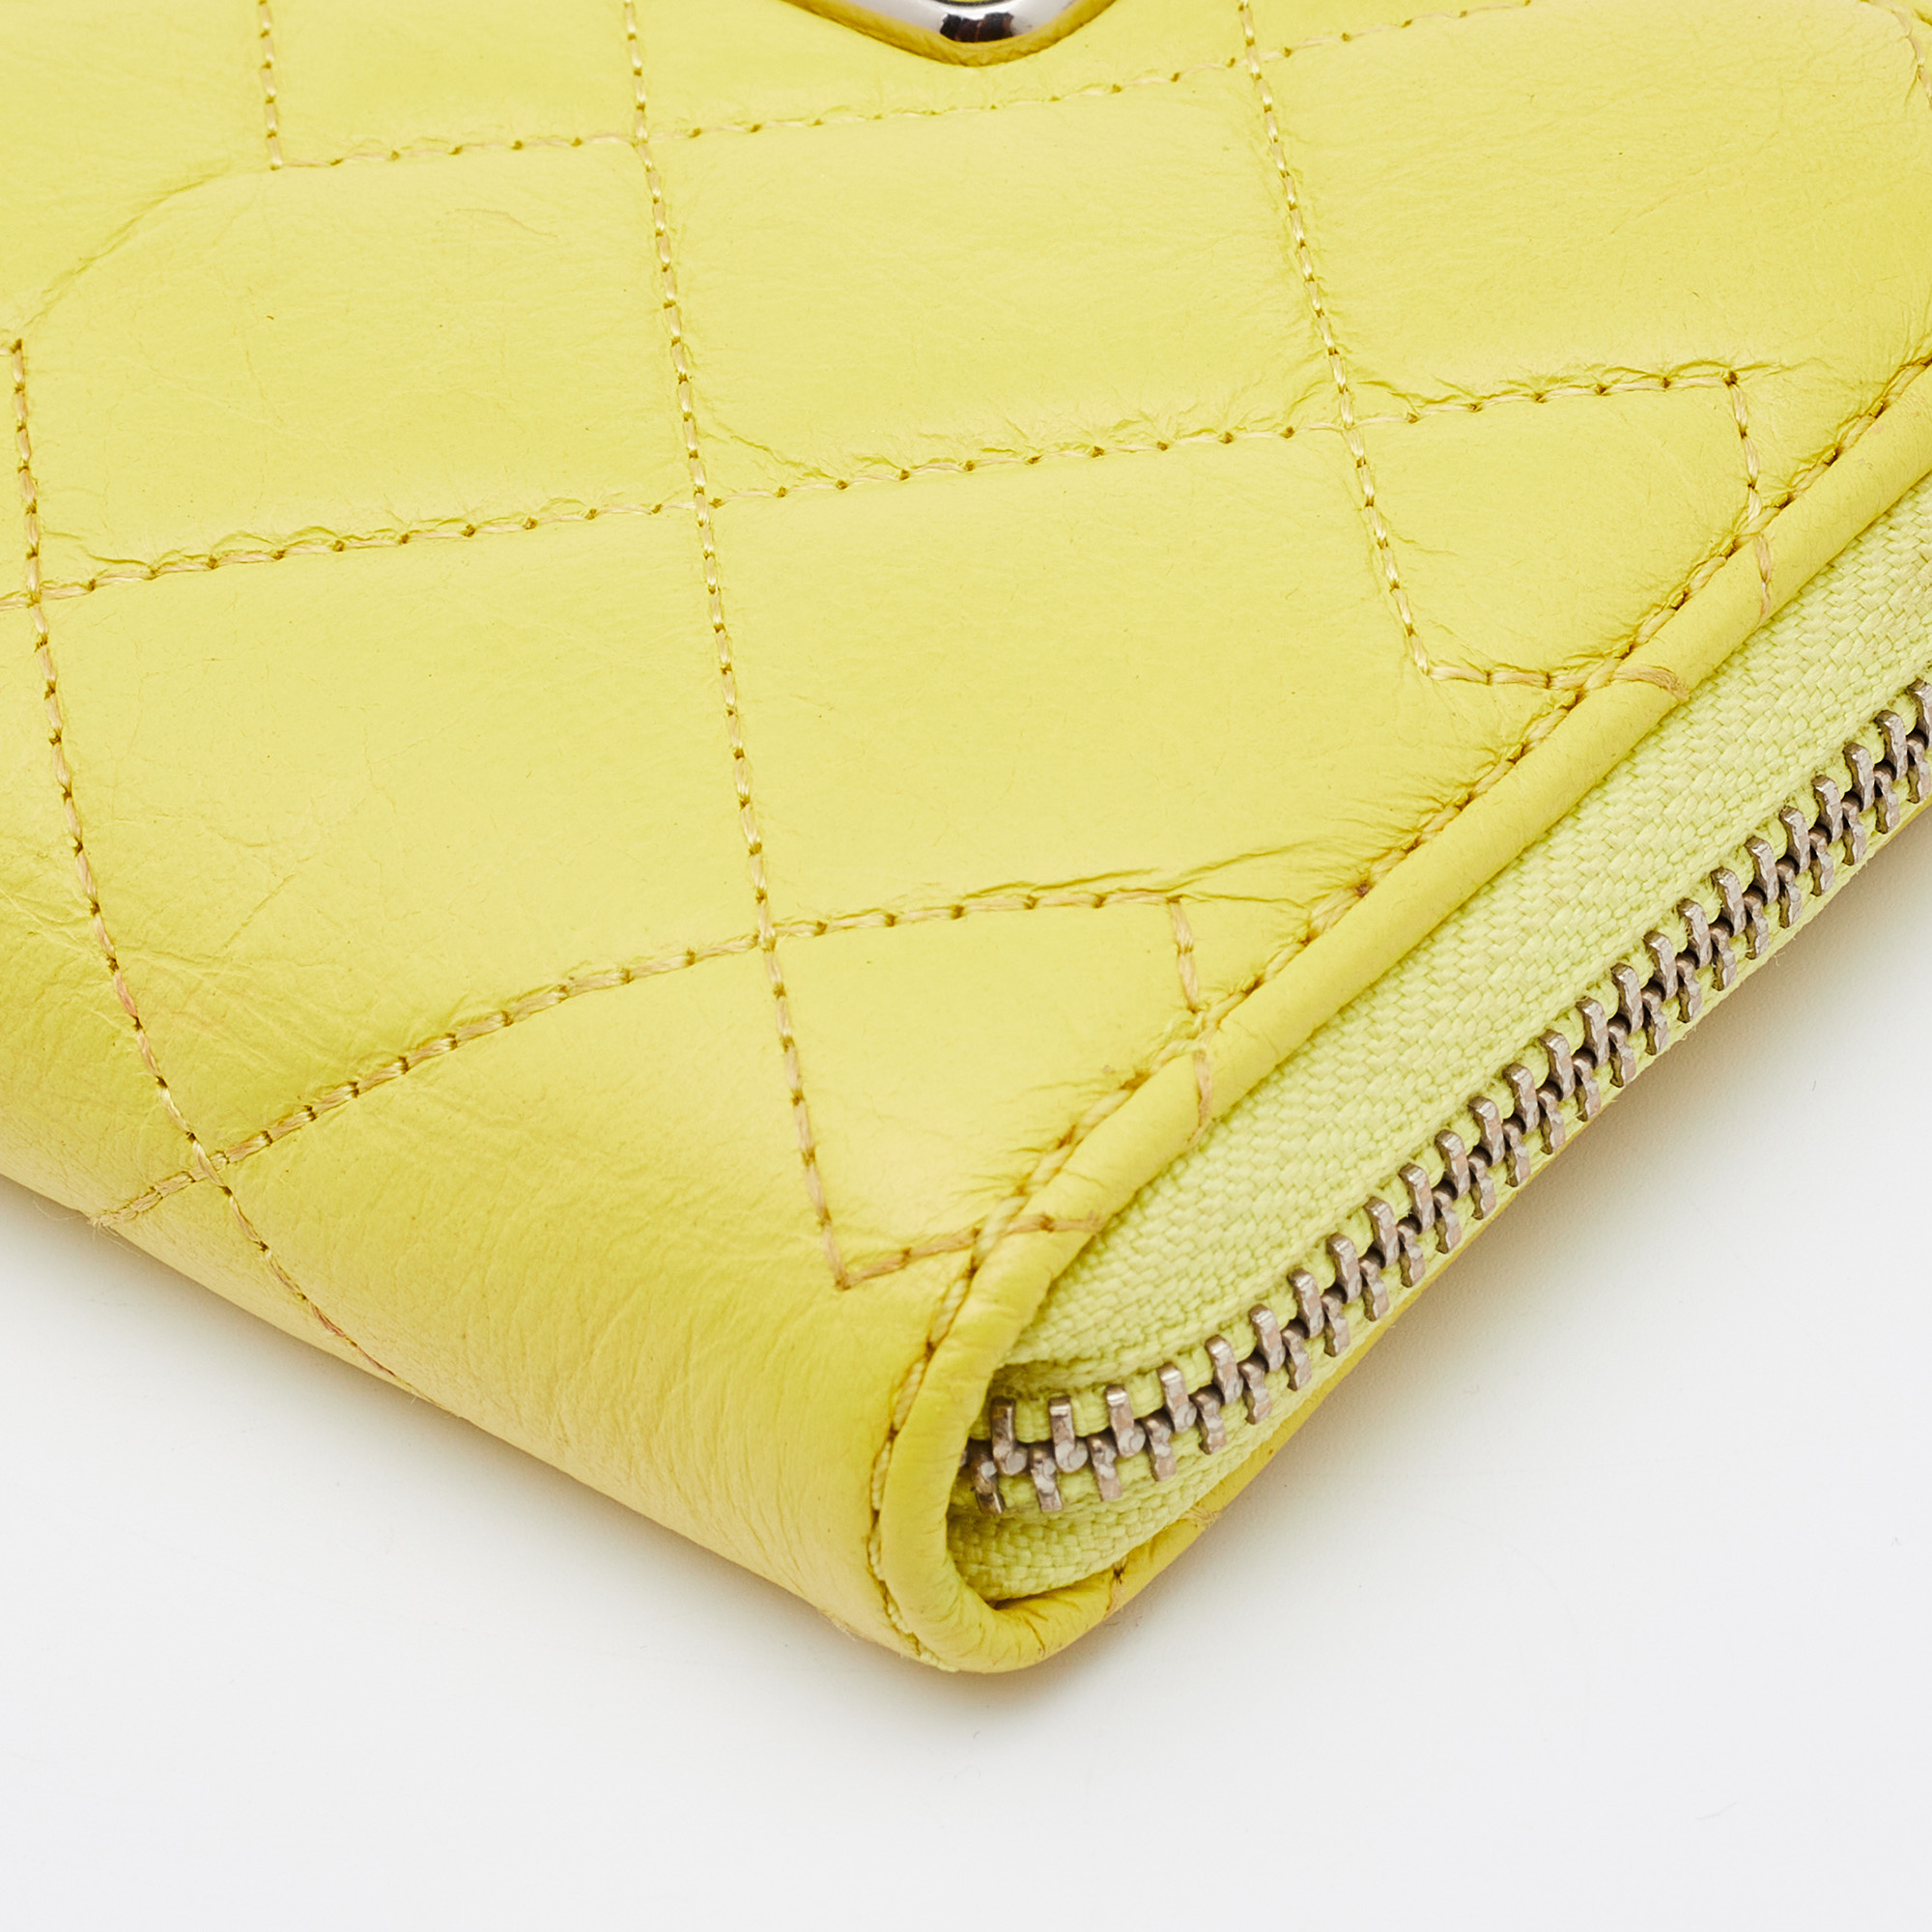 Marc By Marc Jacobs Yellow Quilted Leather Zip Around Wallet